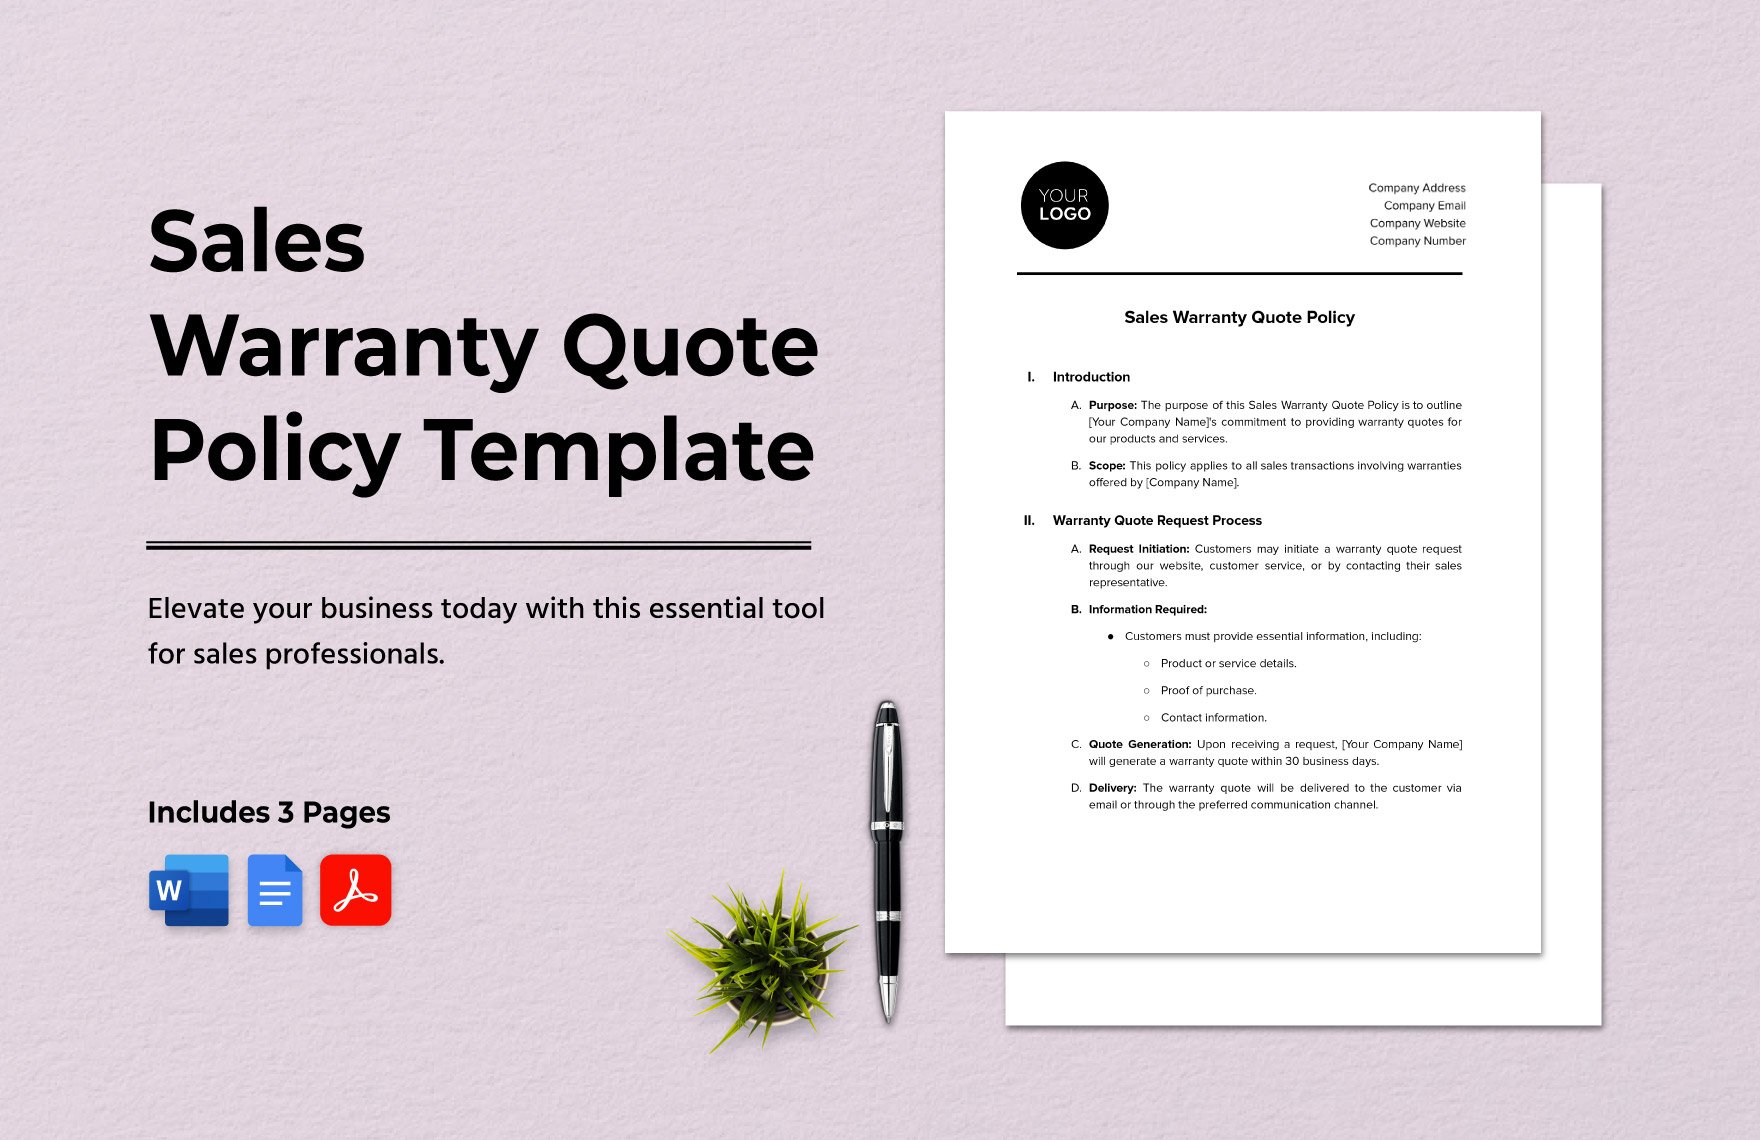 Sales Warranty Quote Policy Template in Word PDF Google Docs